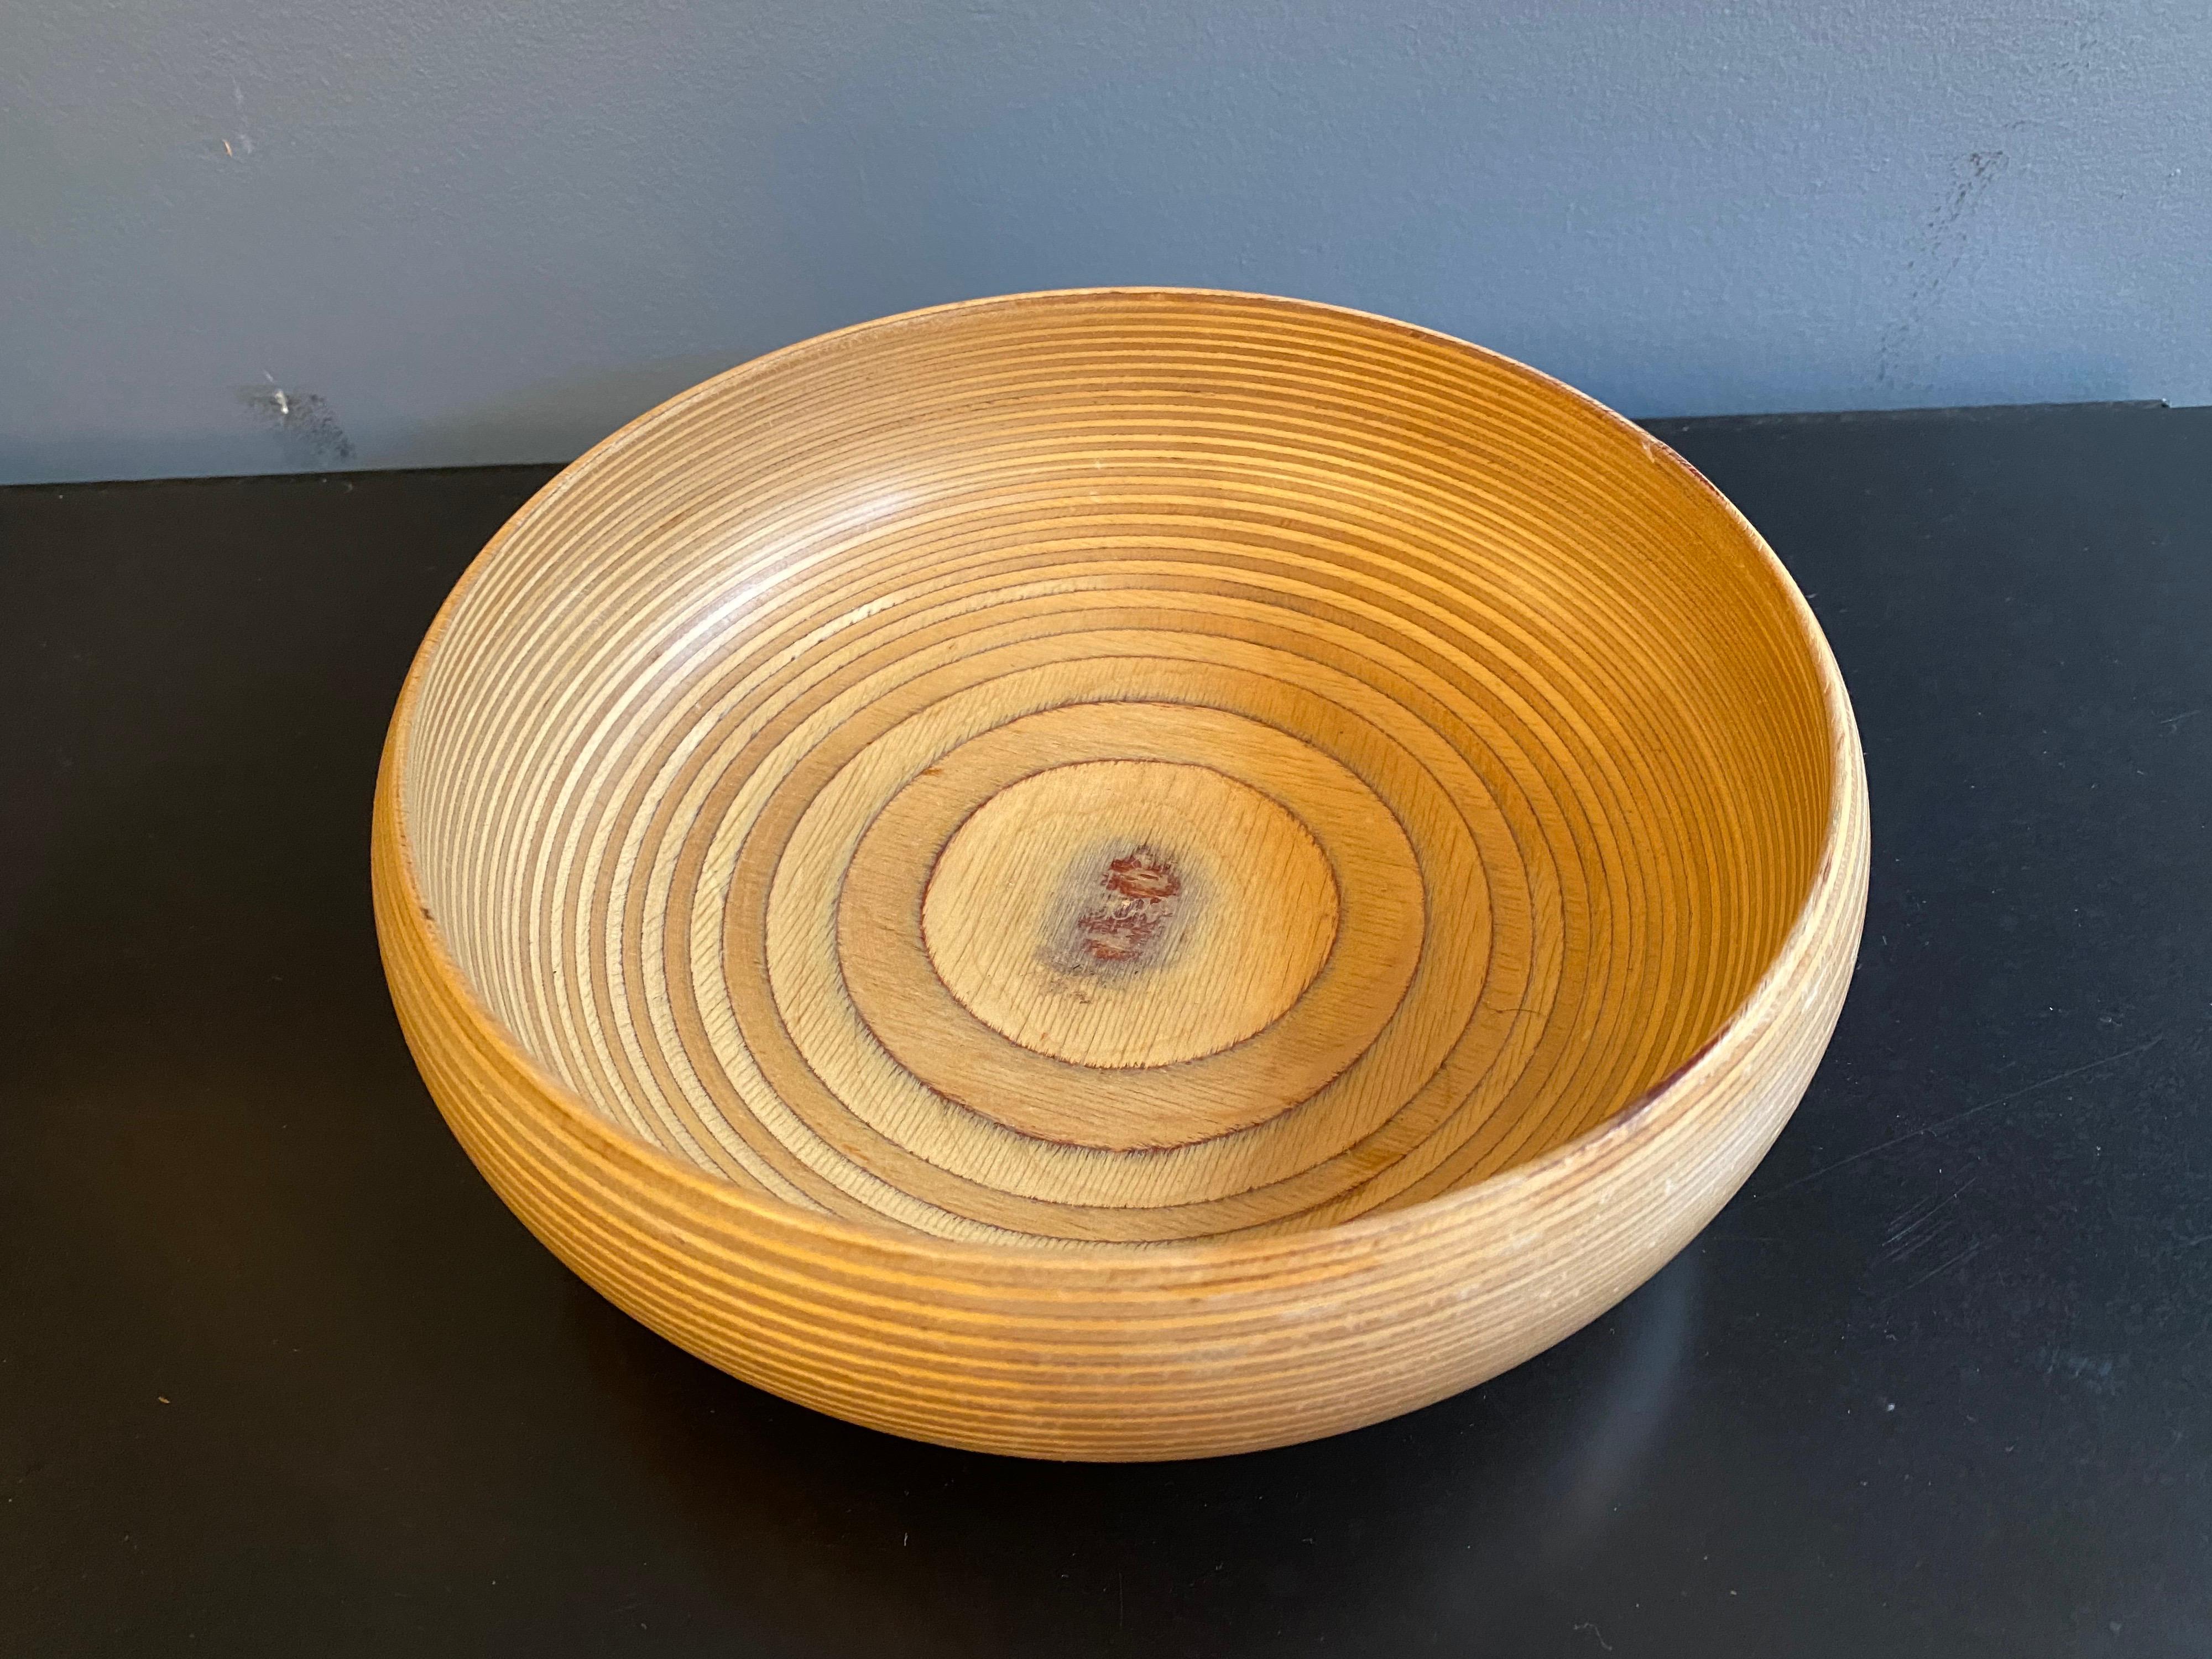 Paavo Asikainen turned laminated wood bowl, marked on bottom. Nice size and color.